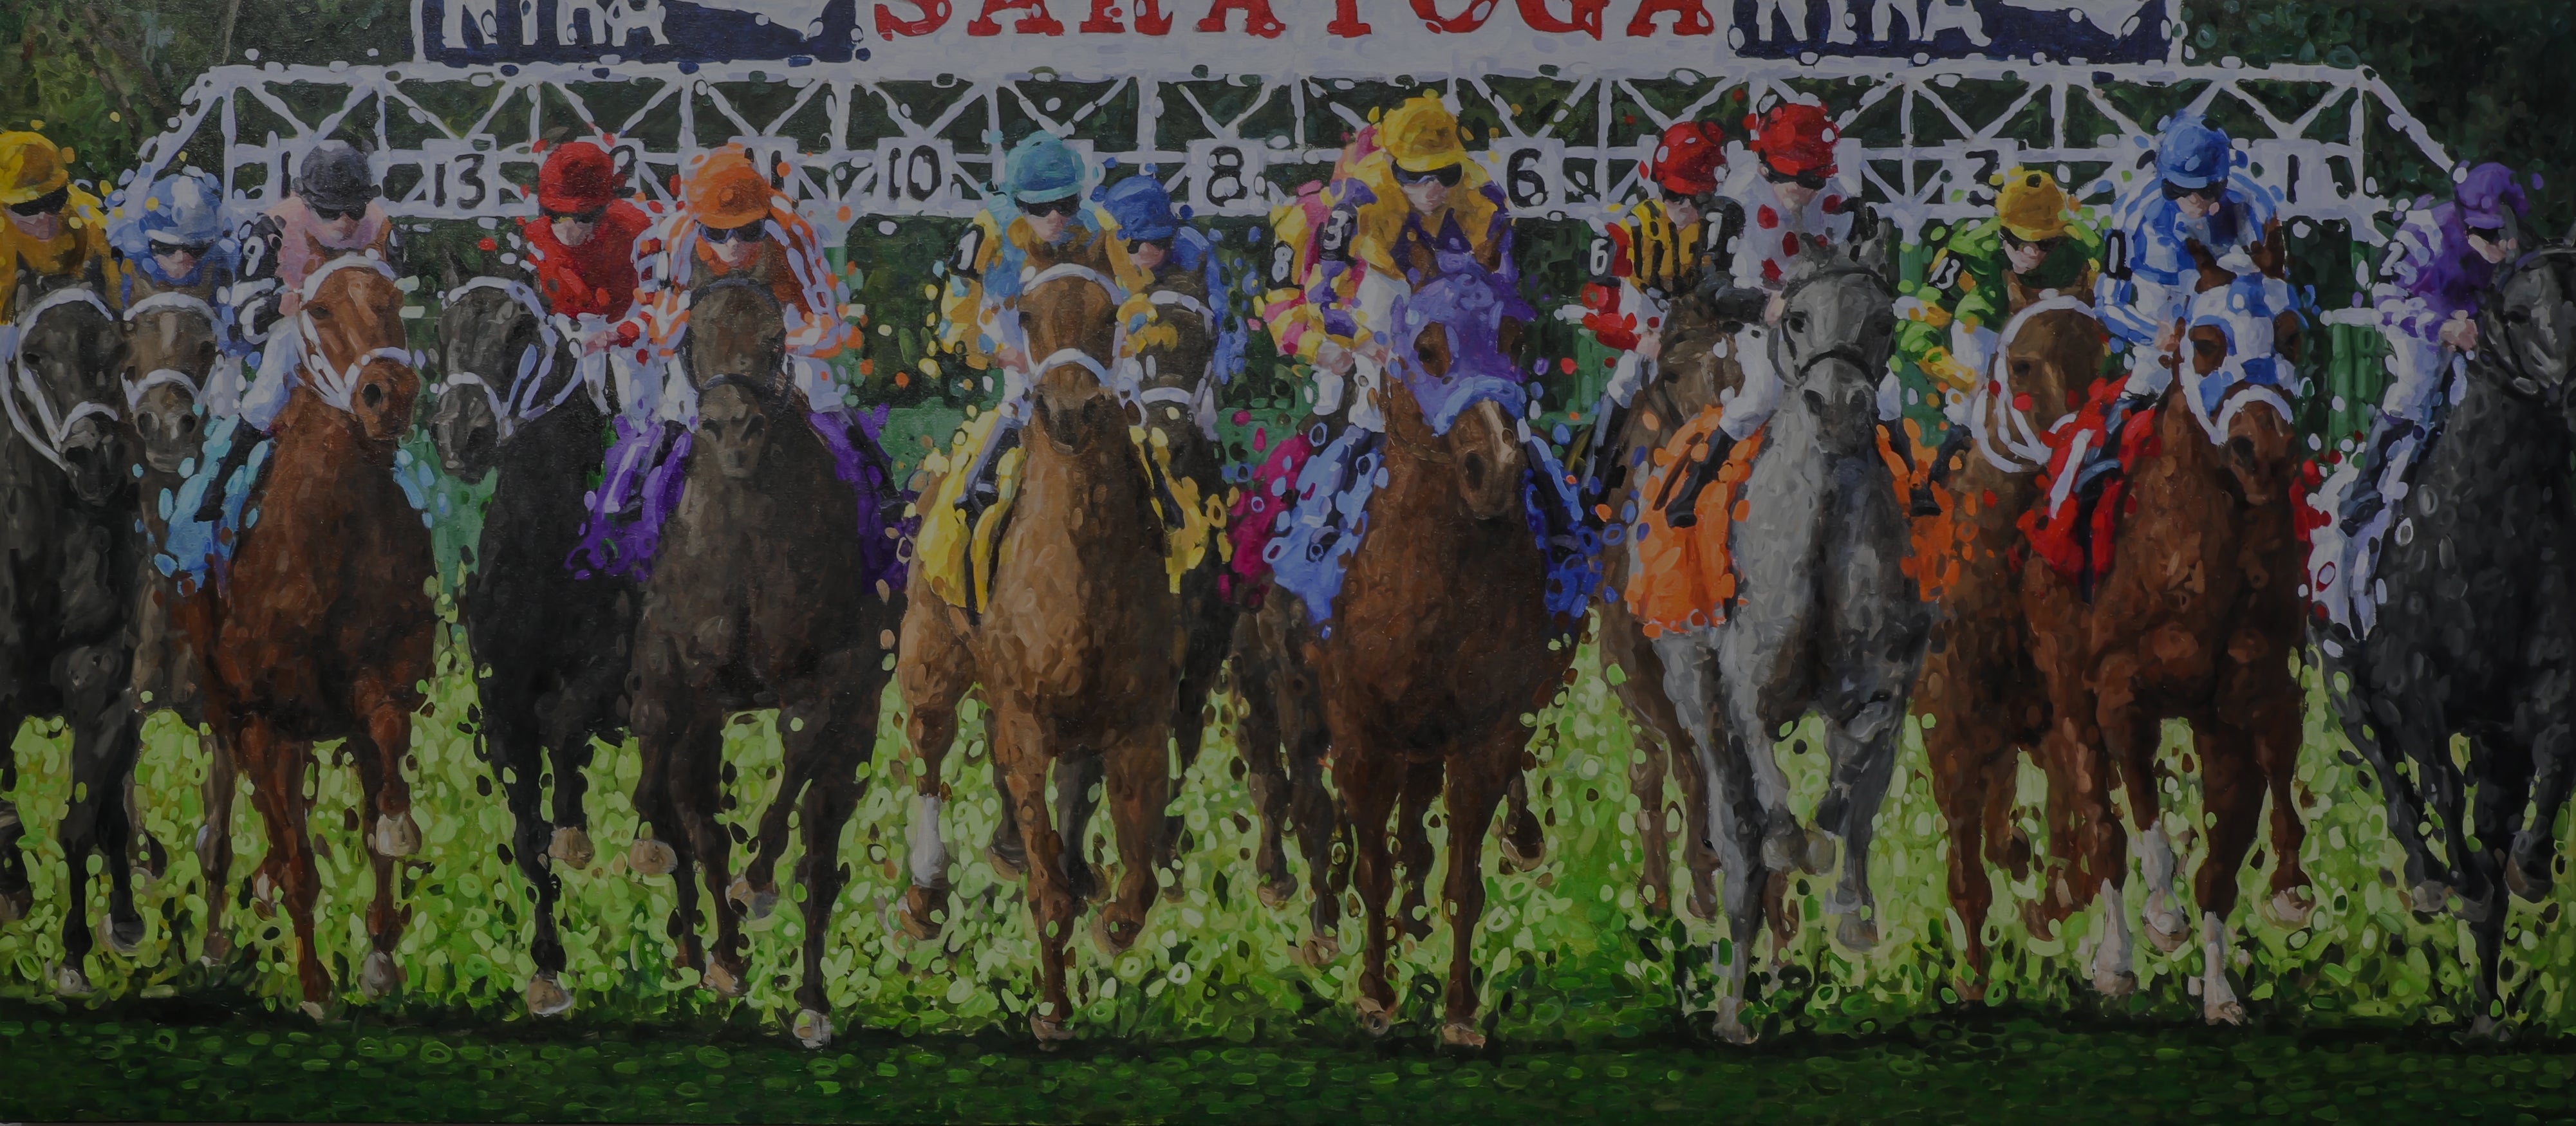 Impressionistic painting of a horse racing event at Saratoga Race Course, with jockeys in vibrant racing silks atop thoroughbred horses. They are positioned behind the starting gate, poised for the race to begin, against a backdrop of green foliage and the 'SARATOGA' sign above.